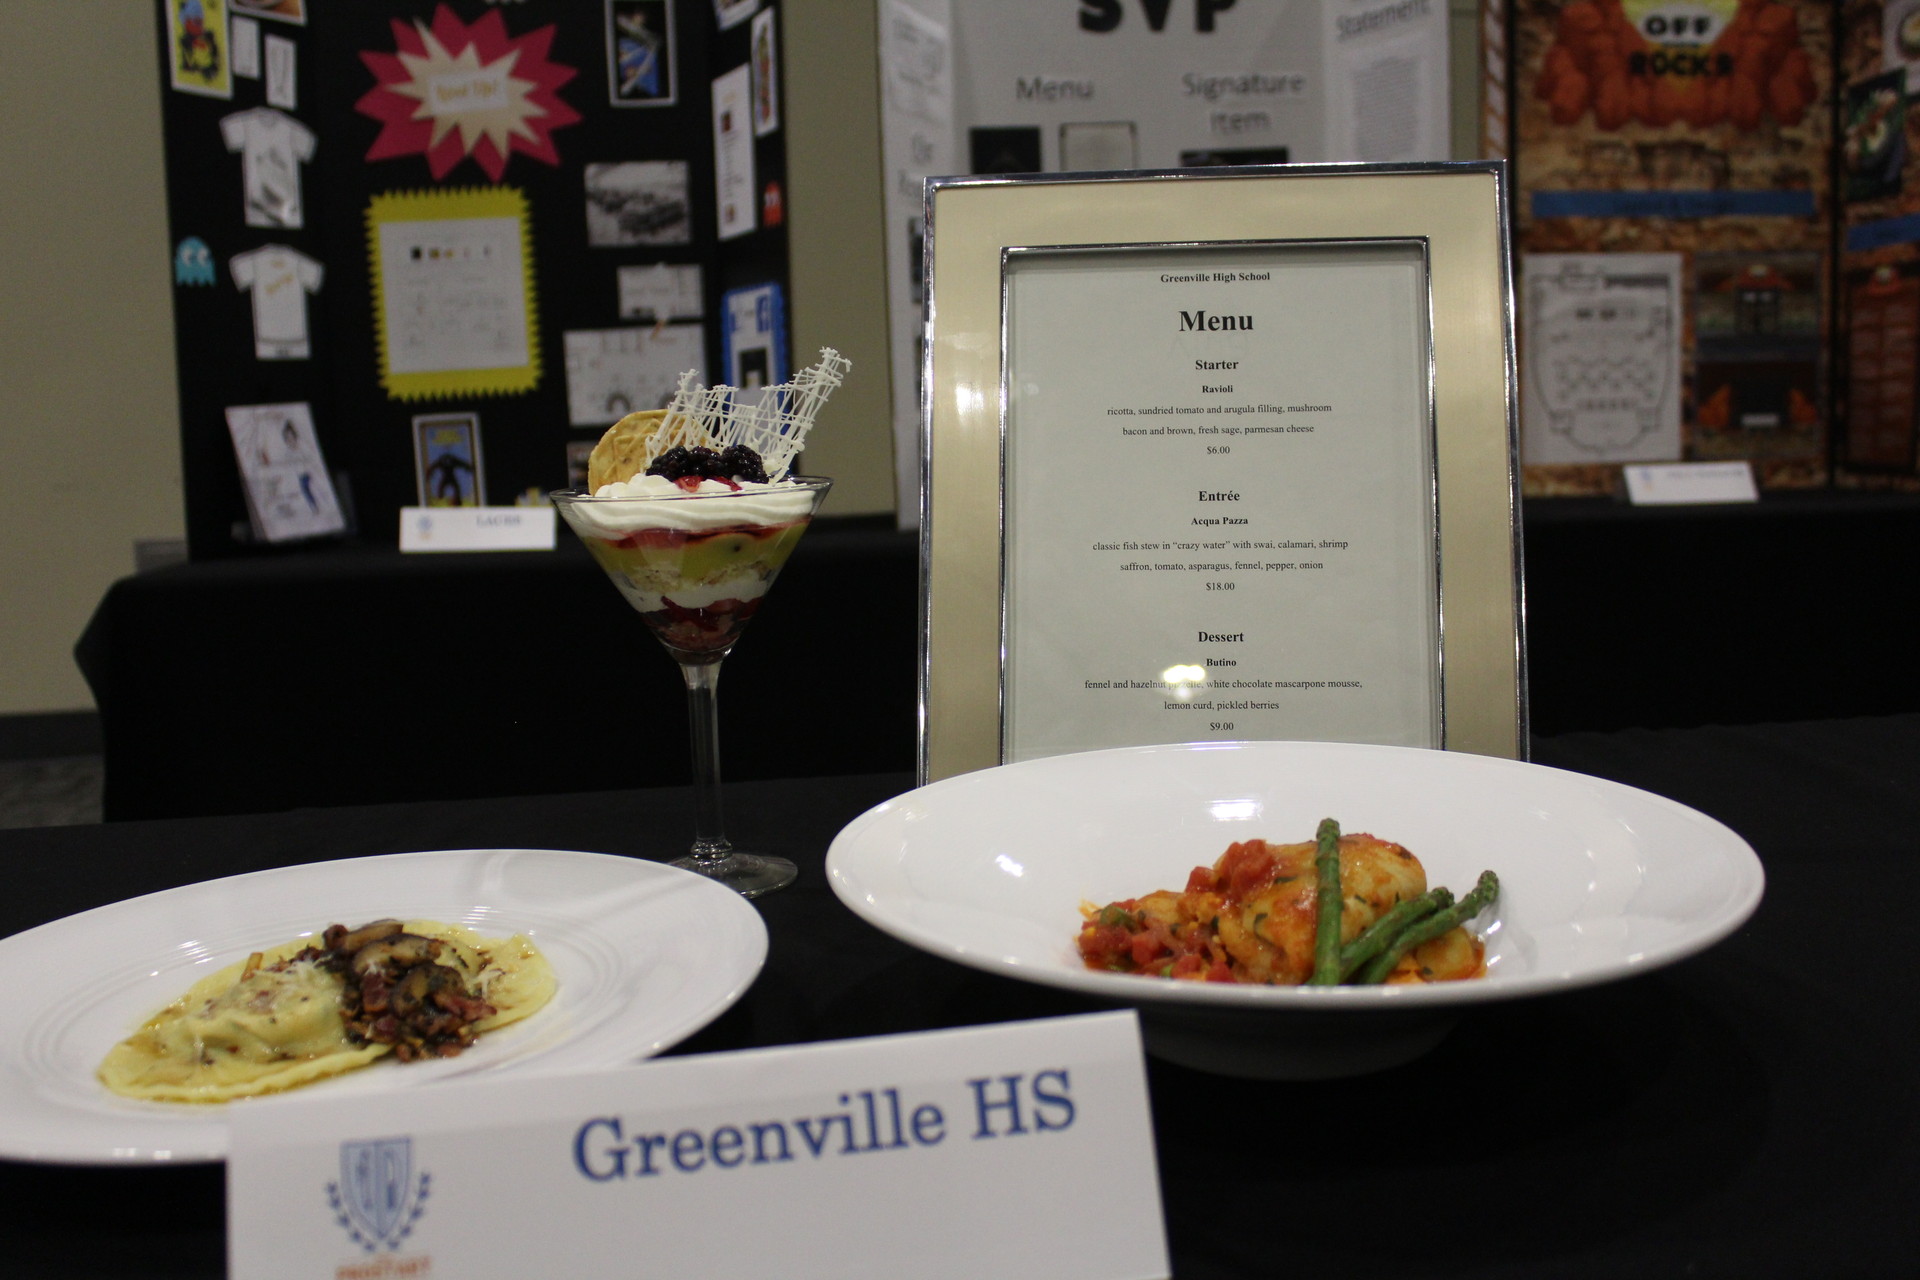 The winning dishes from Greenville High: ravioli in a brown butter sauce with sage, bacon, and shitake mushrooms; All’Acqua Pazza (fish in broth); and a parfait with lemon curd, pickled berries, fennel and a cookie.